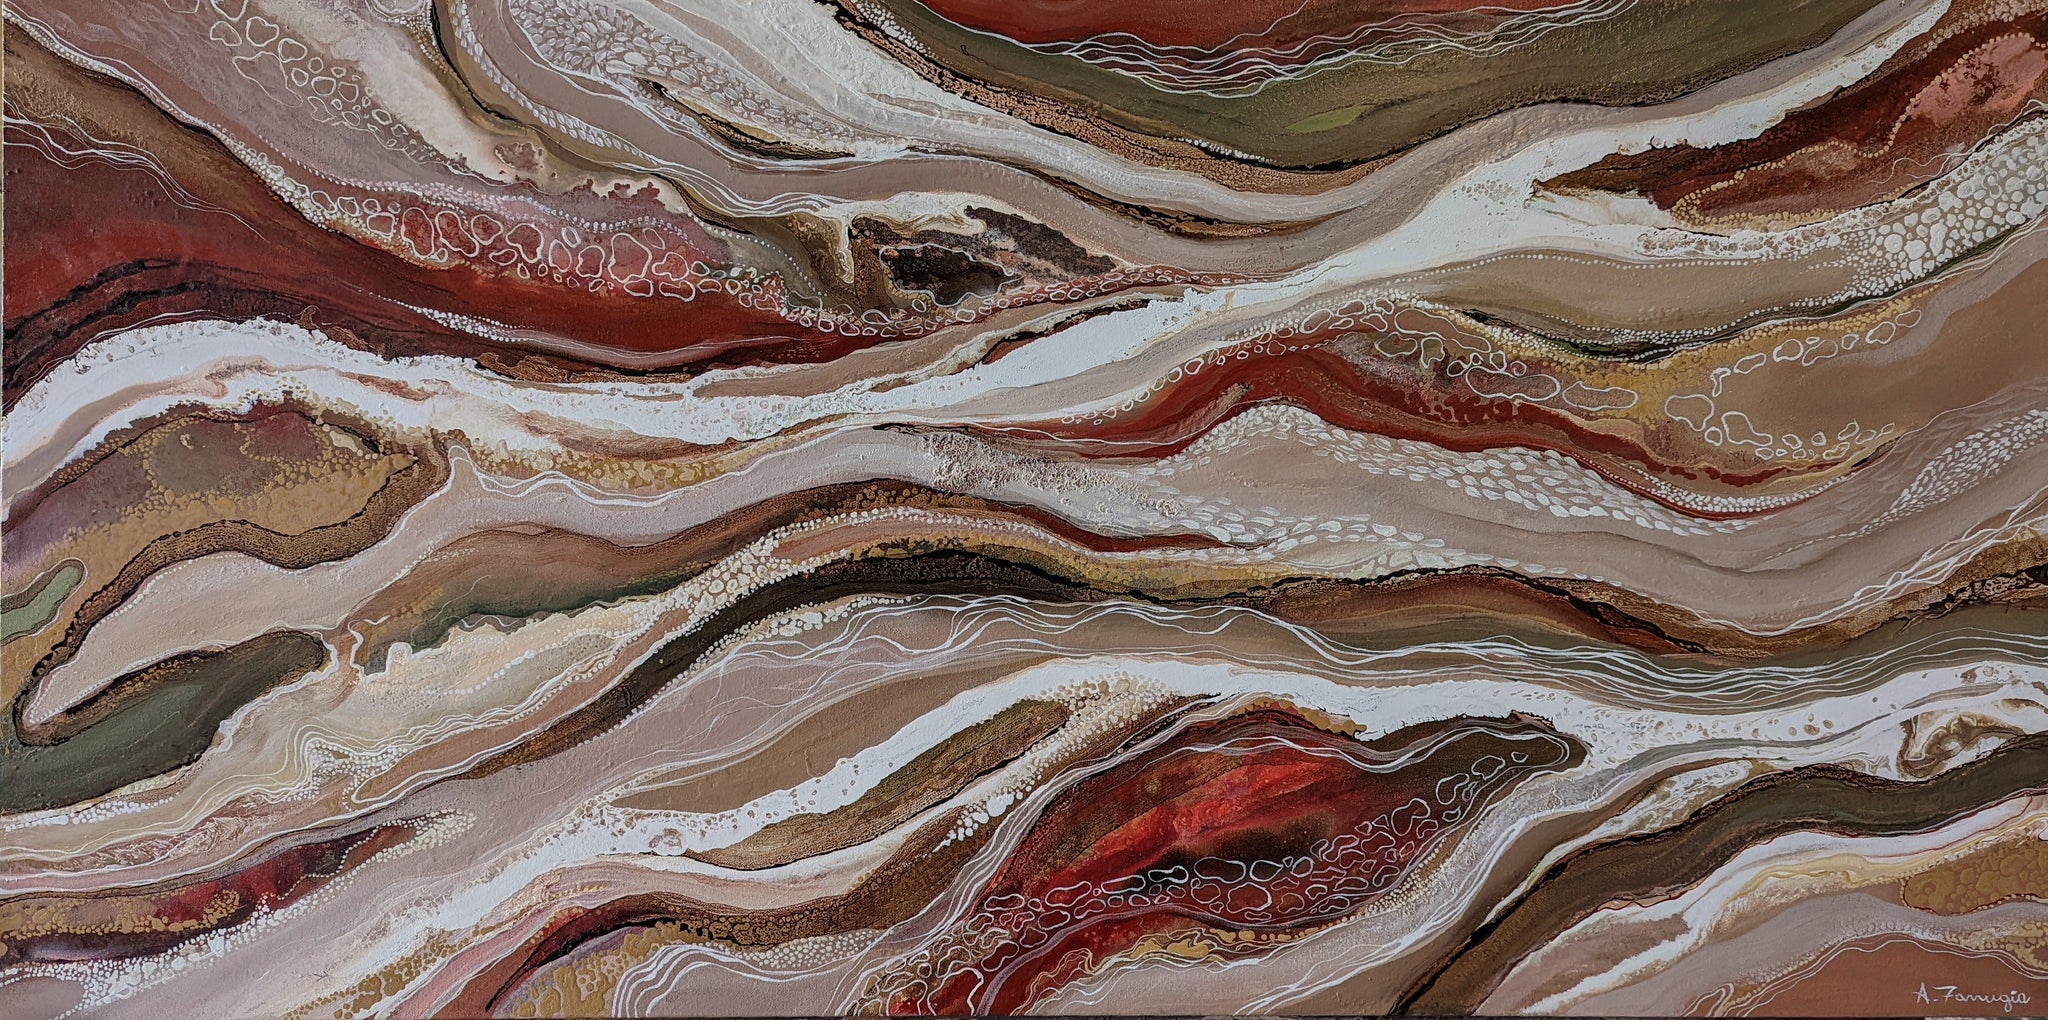 SOLD - Onyx Entwined 150 x 75 cm